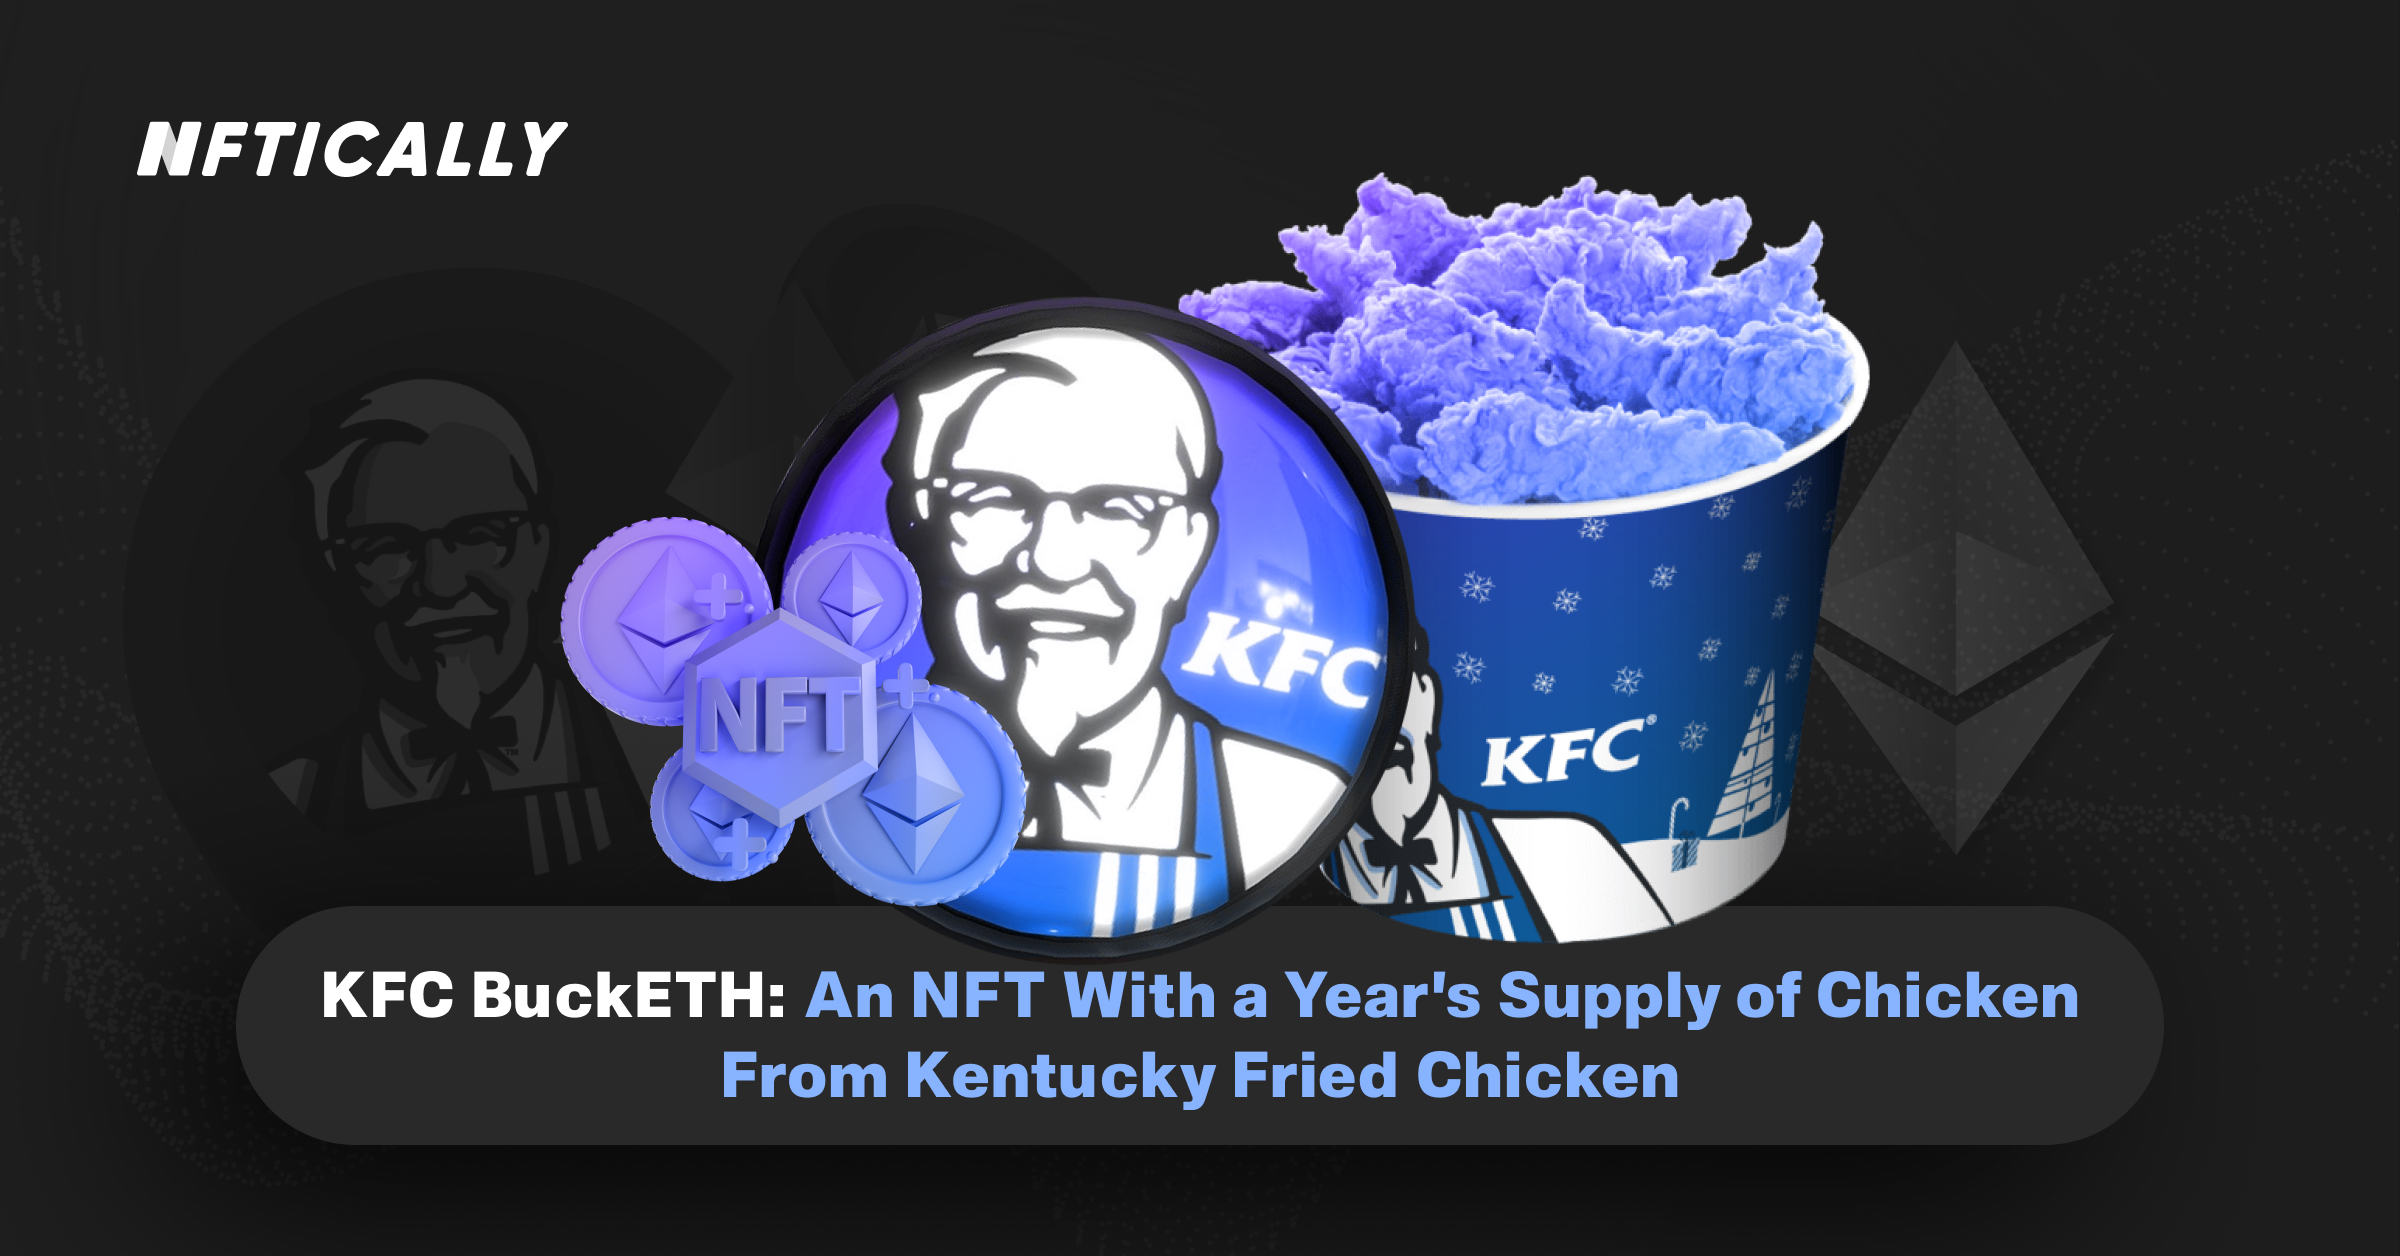 KFC BuckETH: An NFT With a Year’s Supply of Chicken From Kentucky Fried Chicken